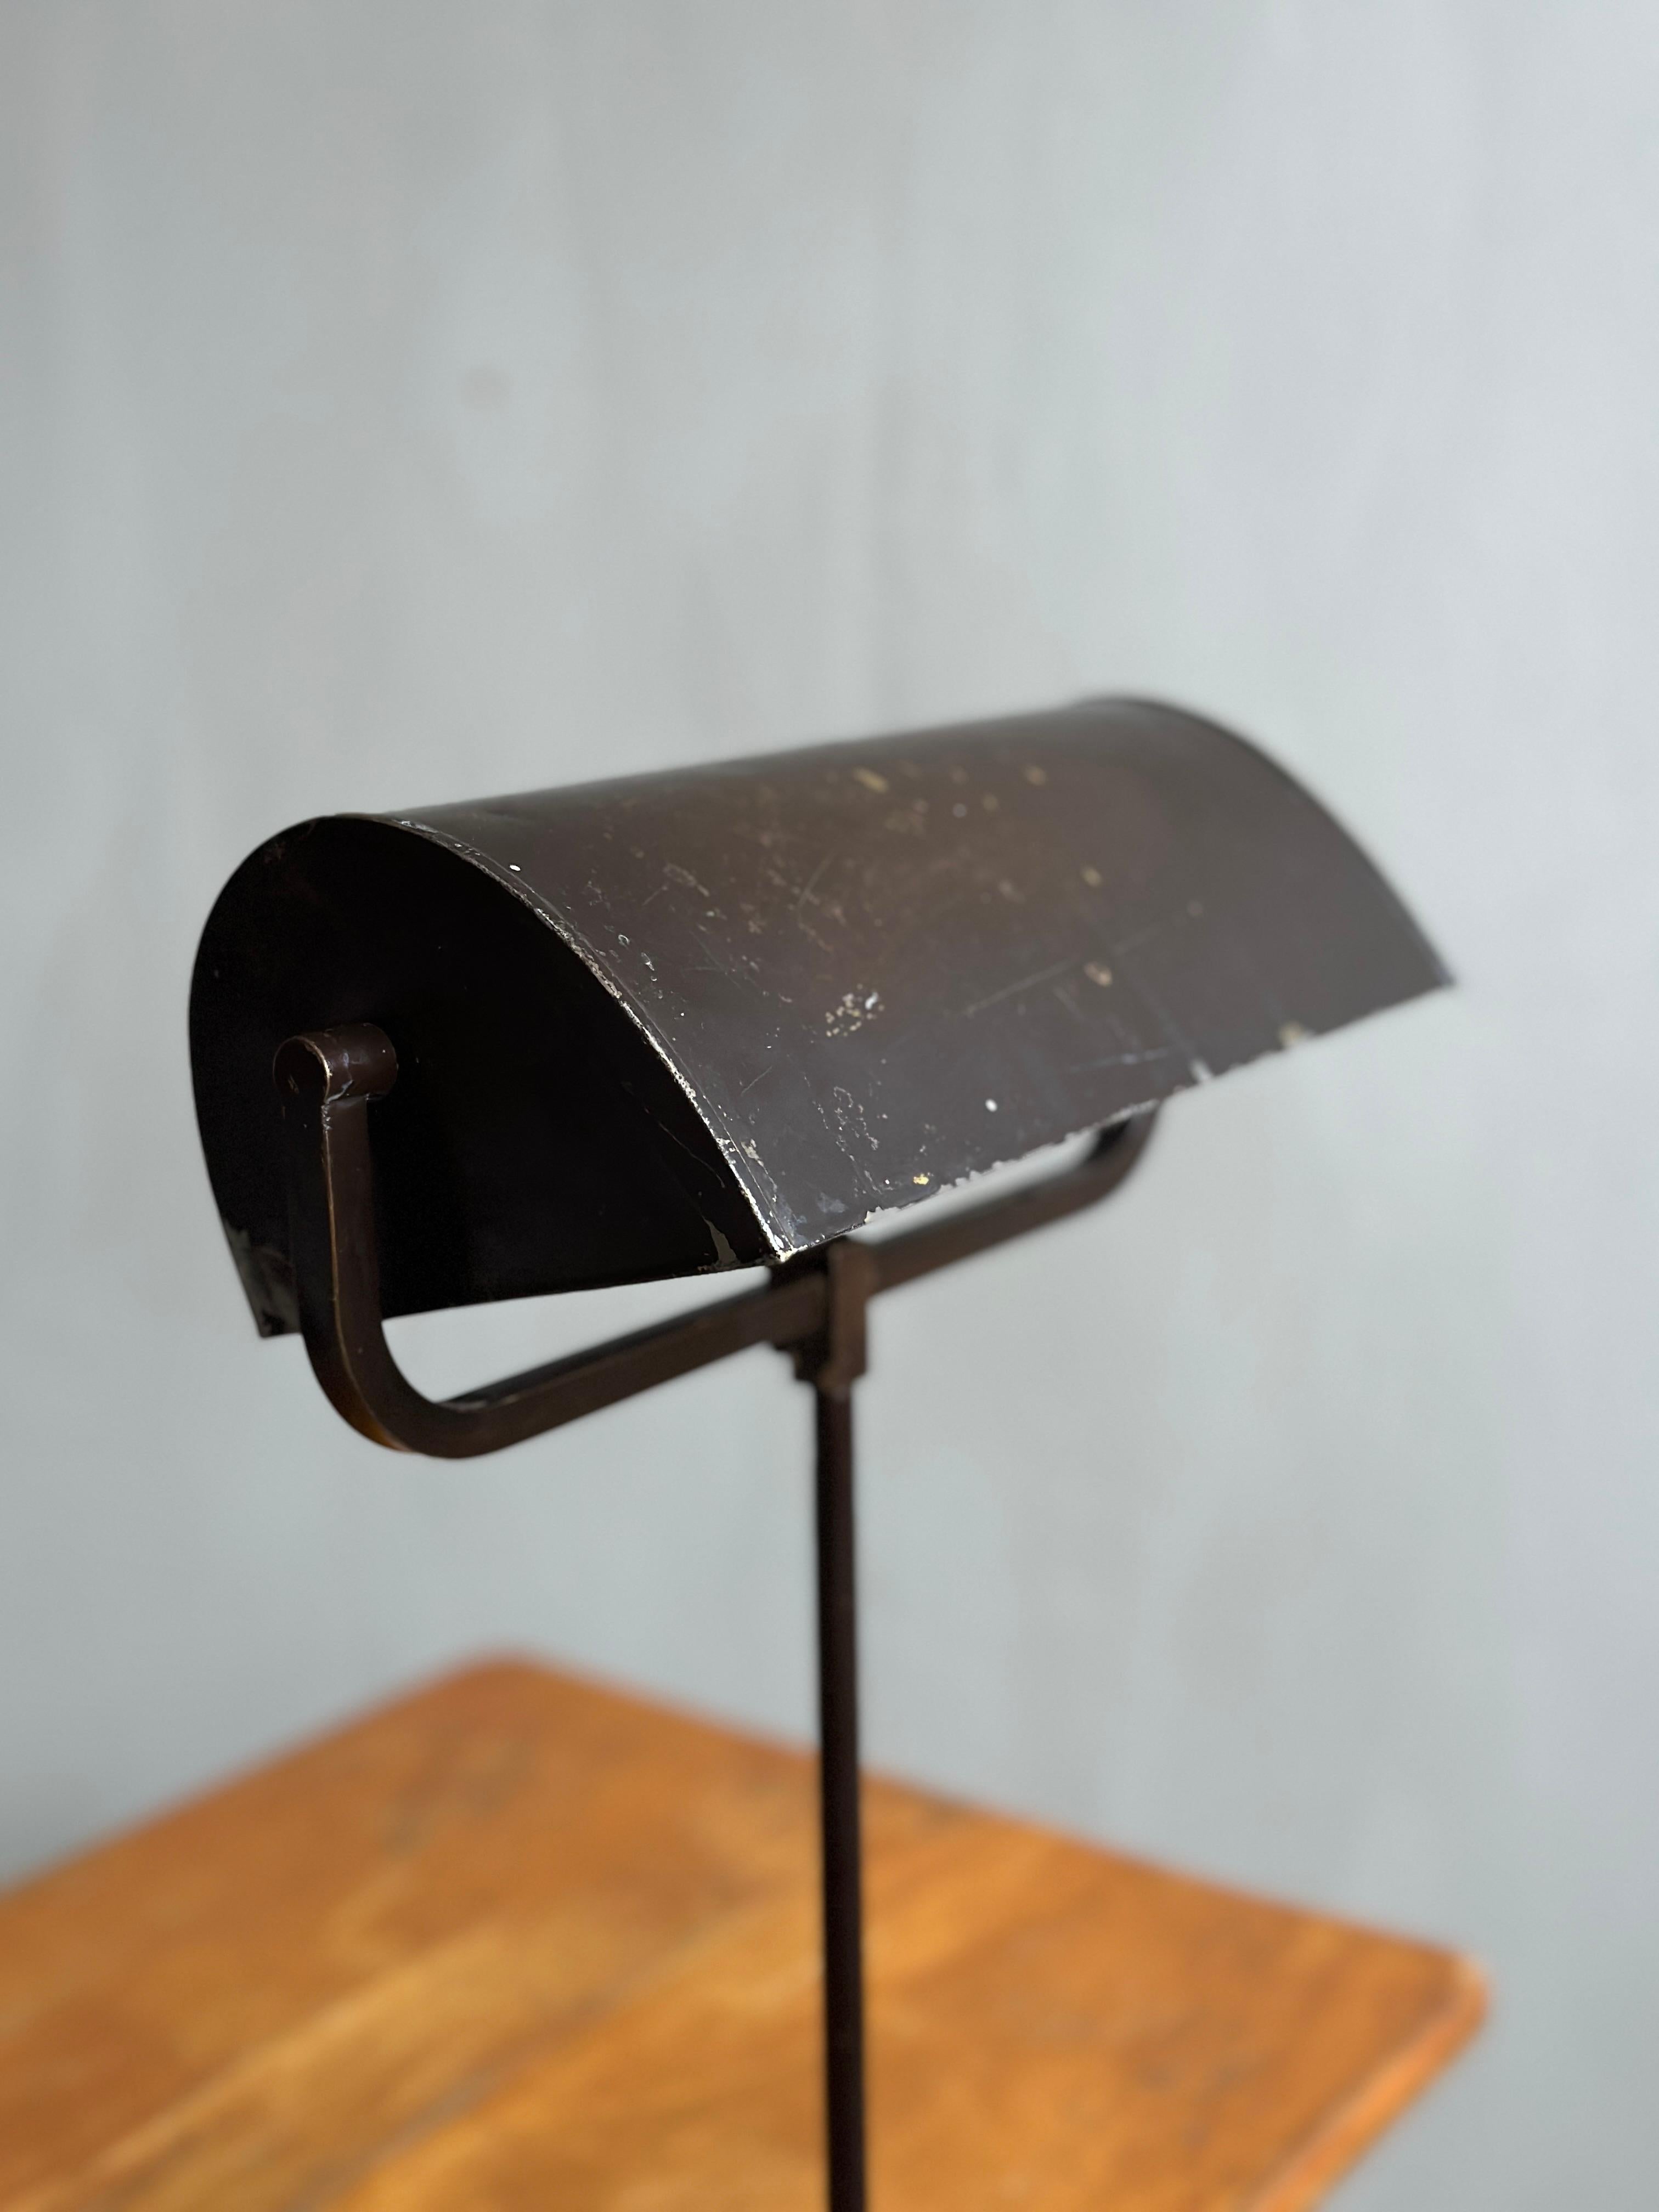 This striking midcentury industrial table lamp is a true vintage gem, hailing from Scandinavia in the 1930s/40s. The lamp is designed to be mounted on various surfaces, such as tables, desks or bedside tables, with a straight arm that extends upward